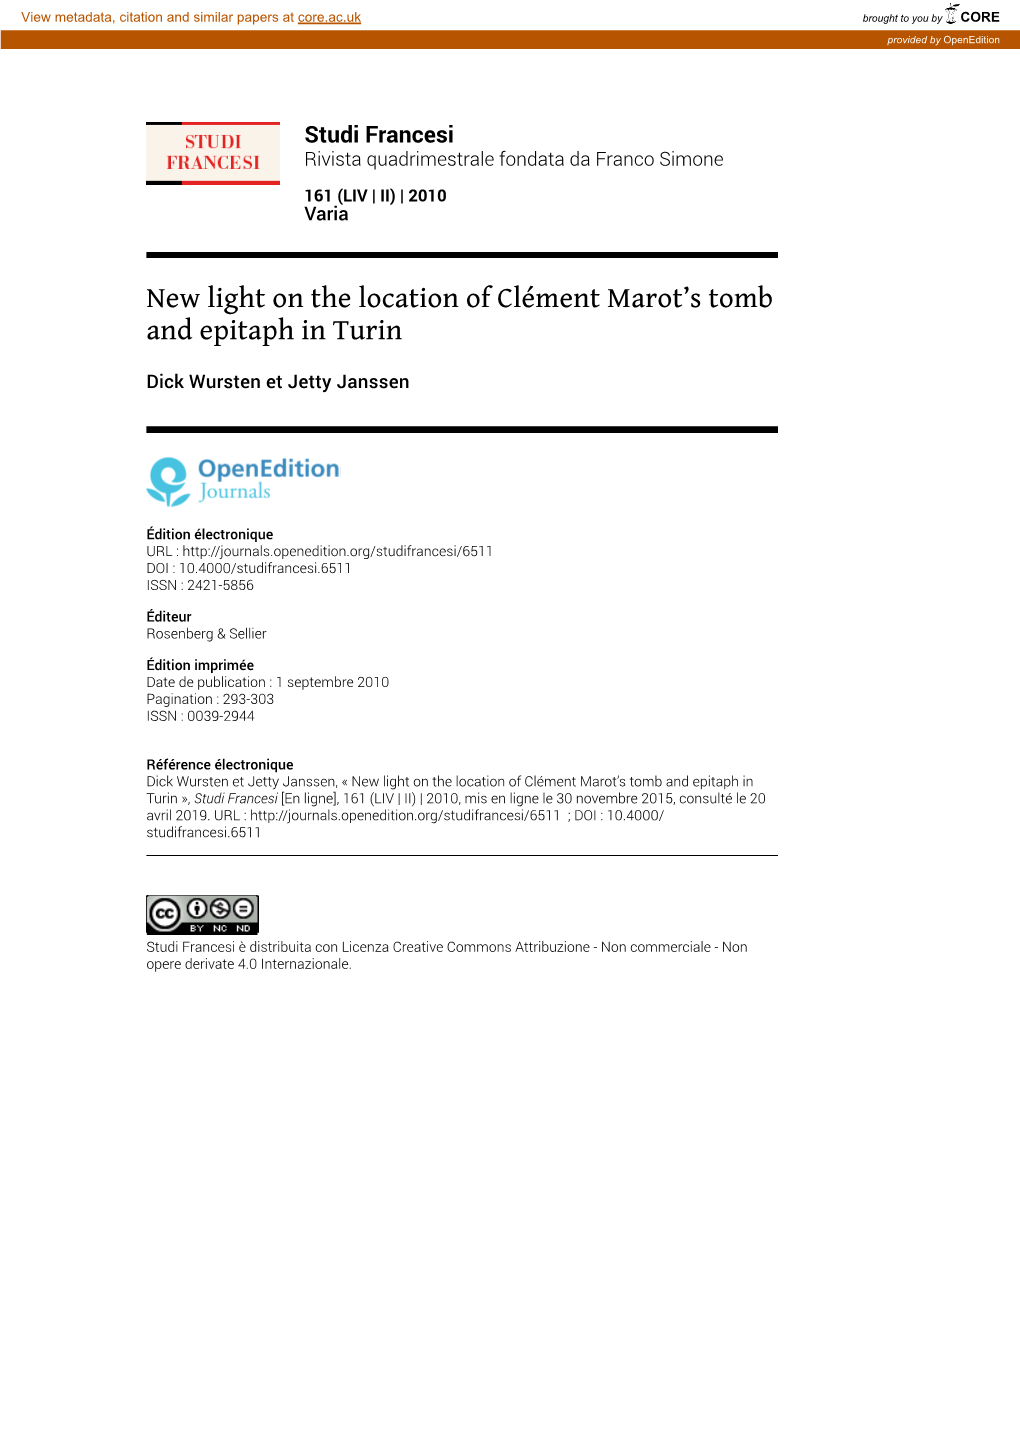 New Light on the Location of Clément Marot's Tomb and Epitaph in Turin